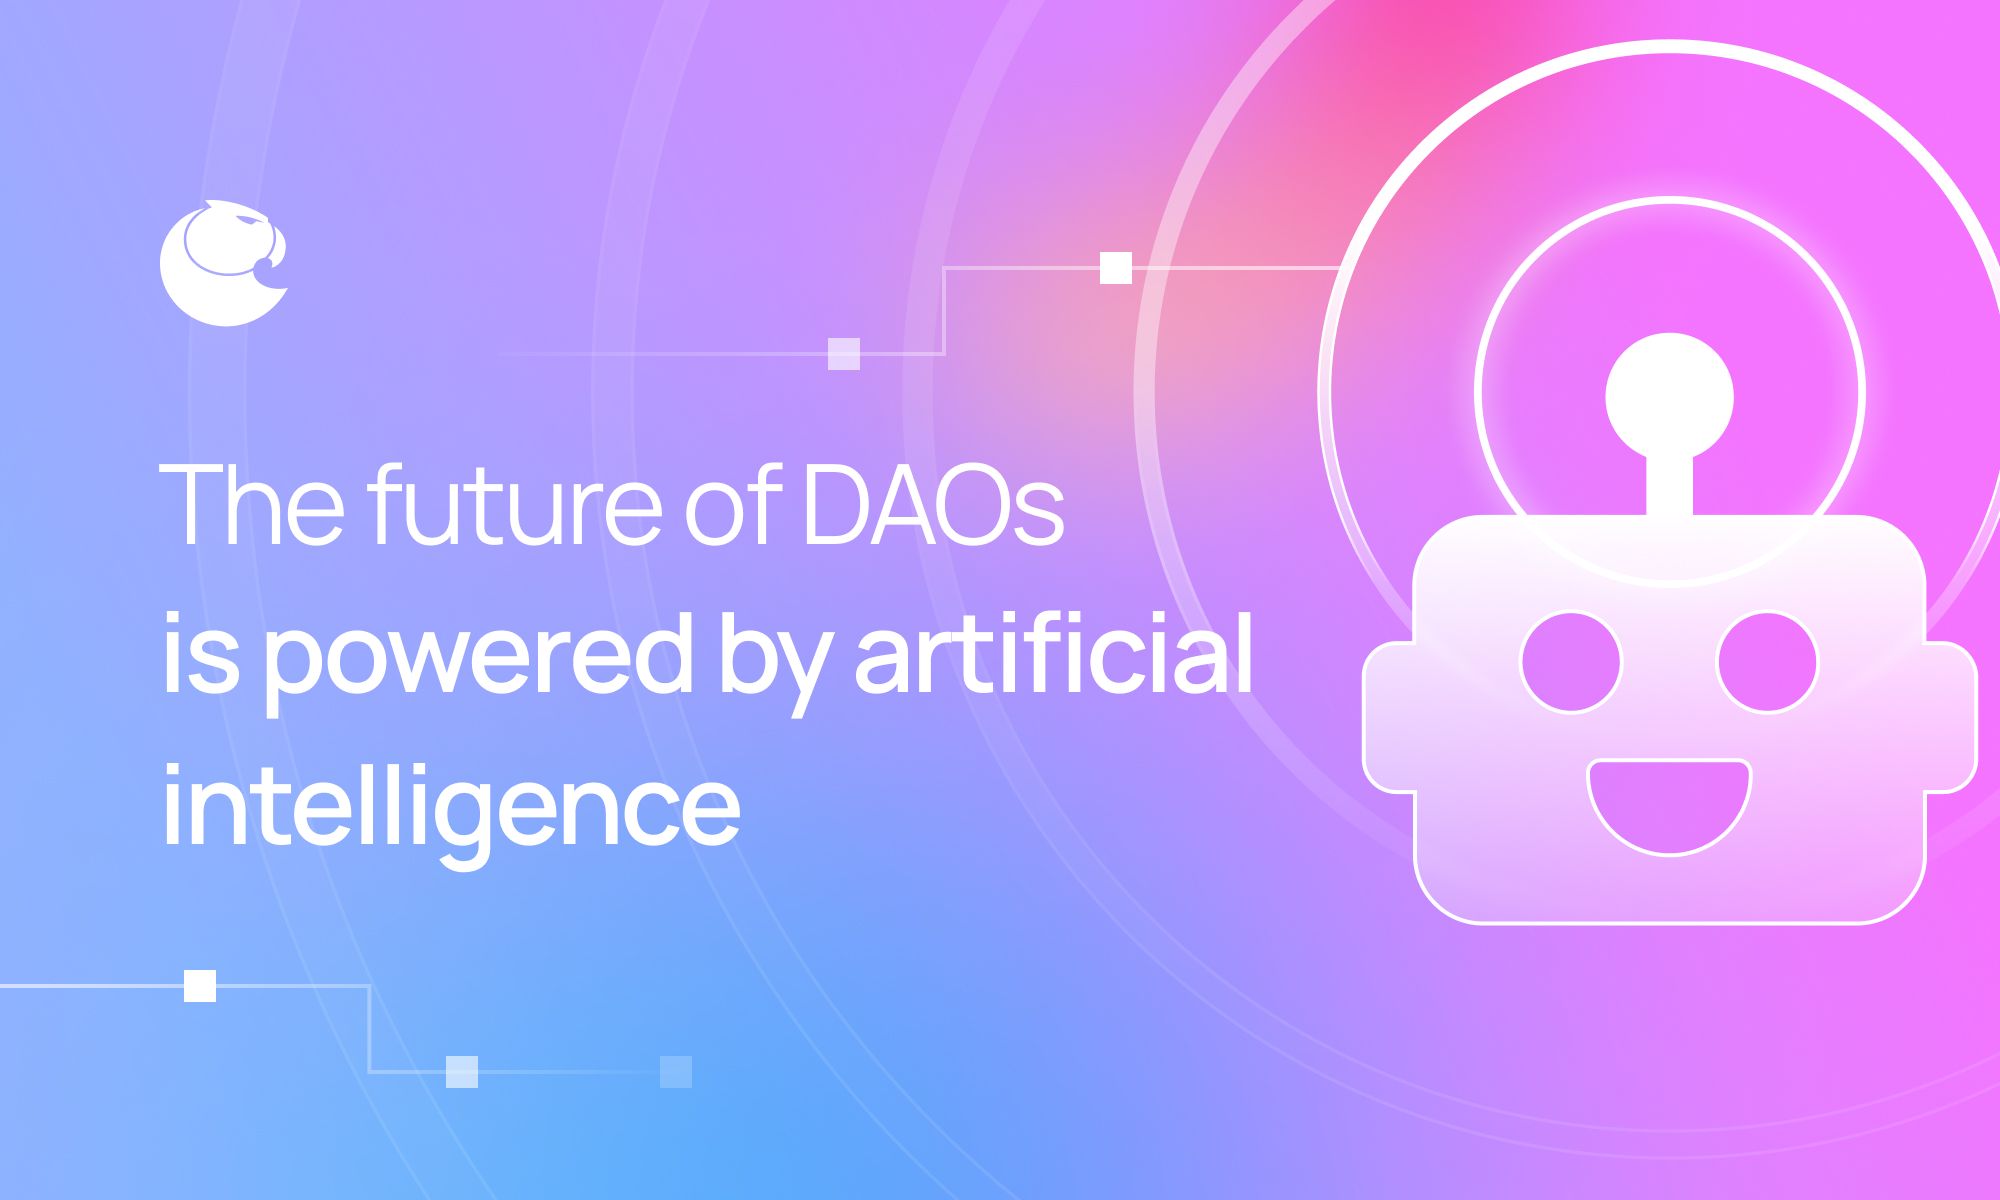 The Future of DAOs is Powered by AI